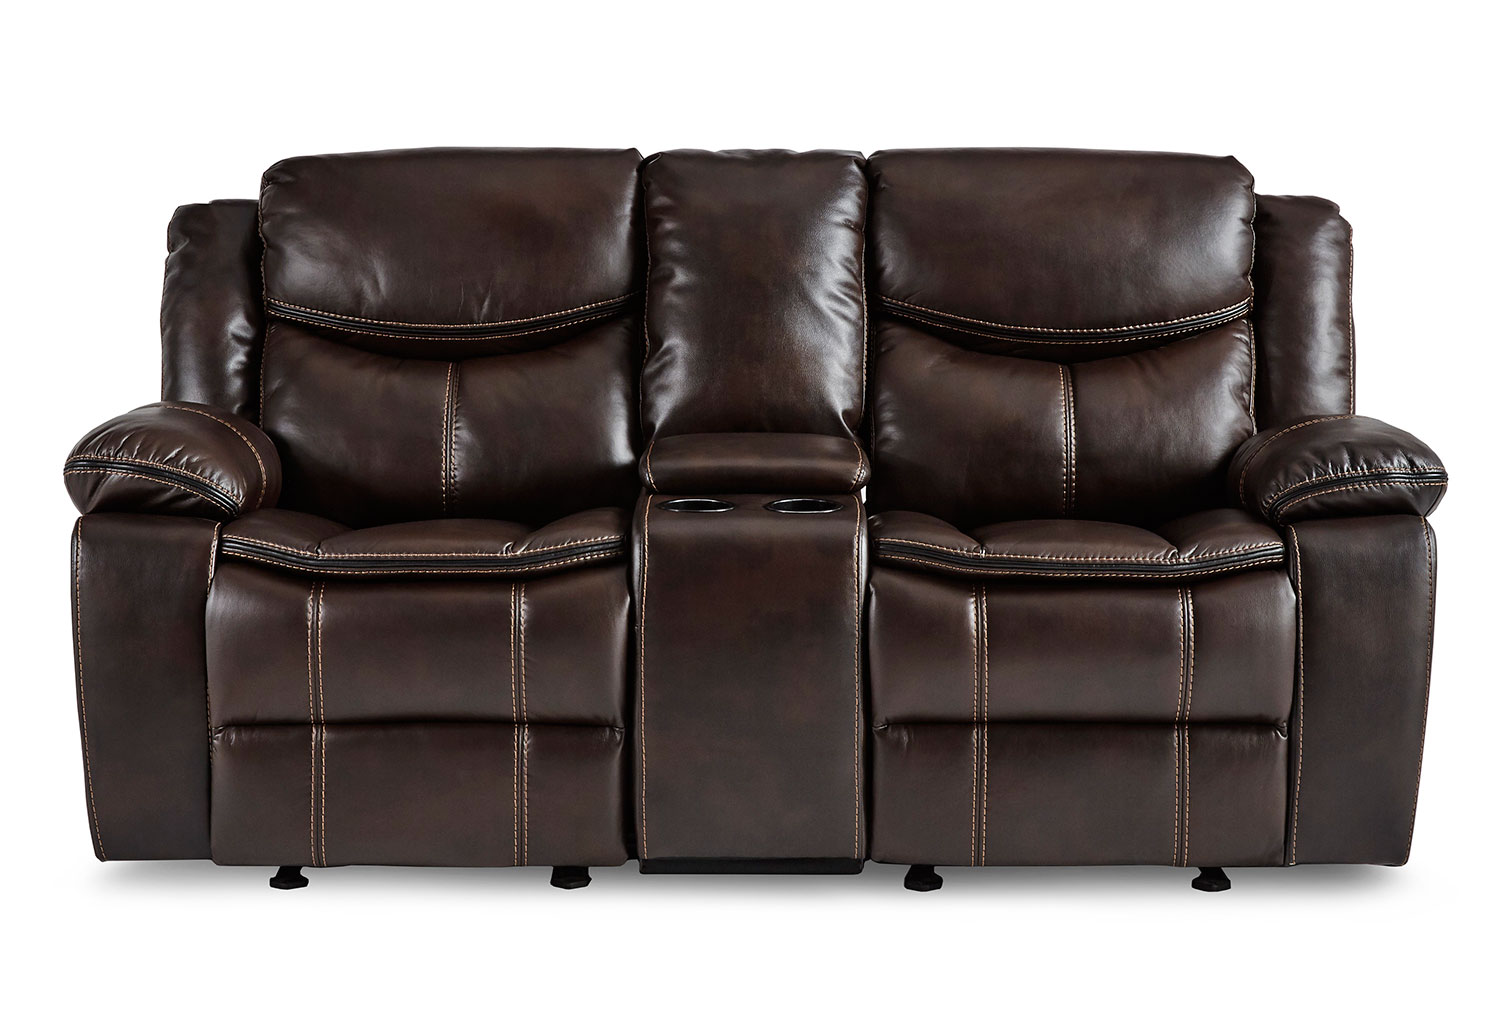 Homelegance Bastrop Double Glider Reclining Love Seat With Center Console - Dark Brown